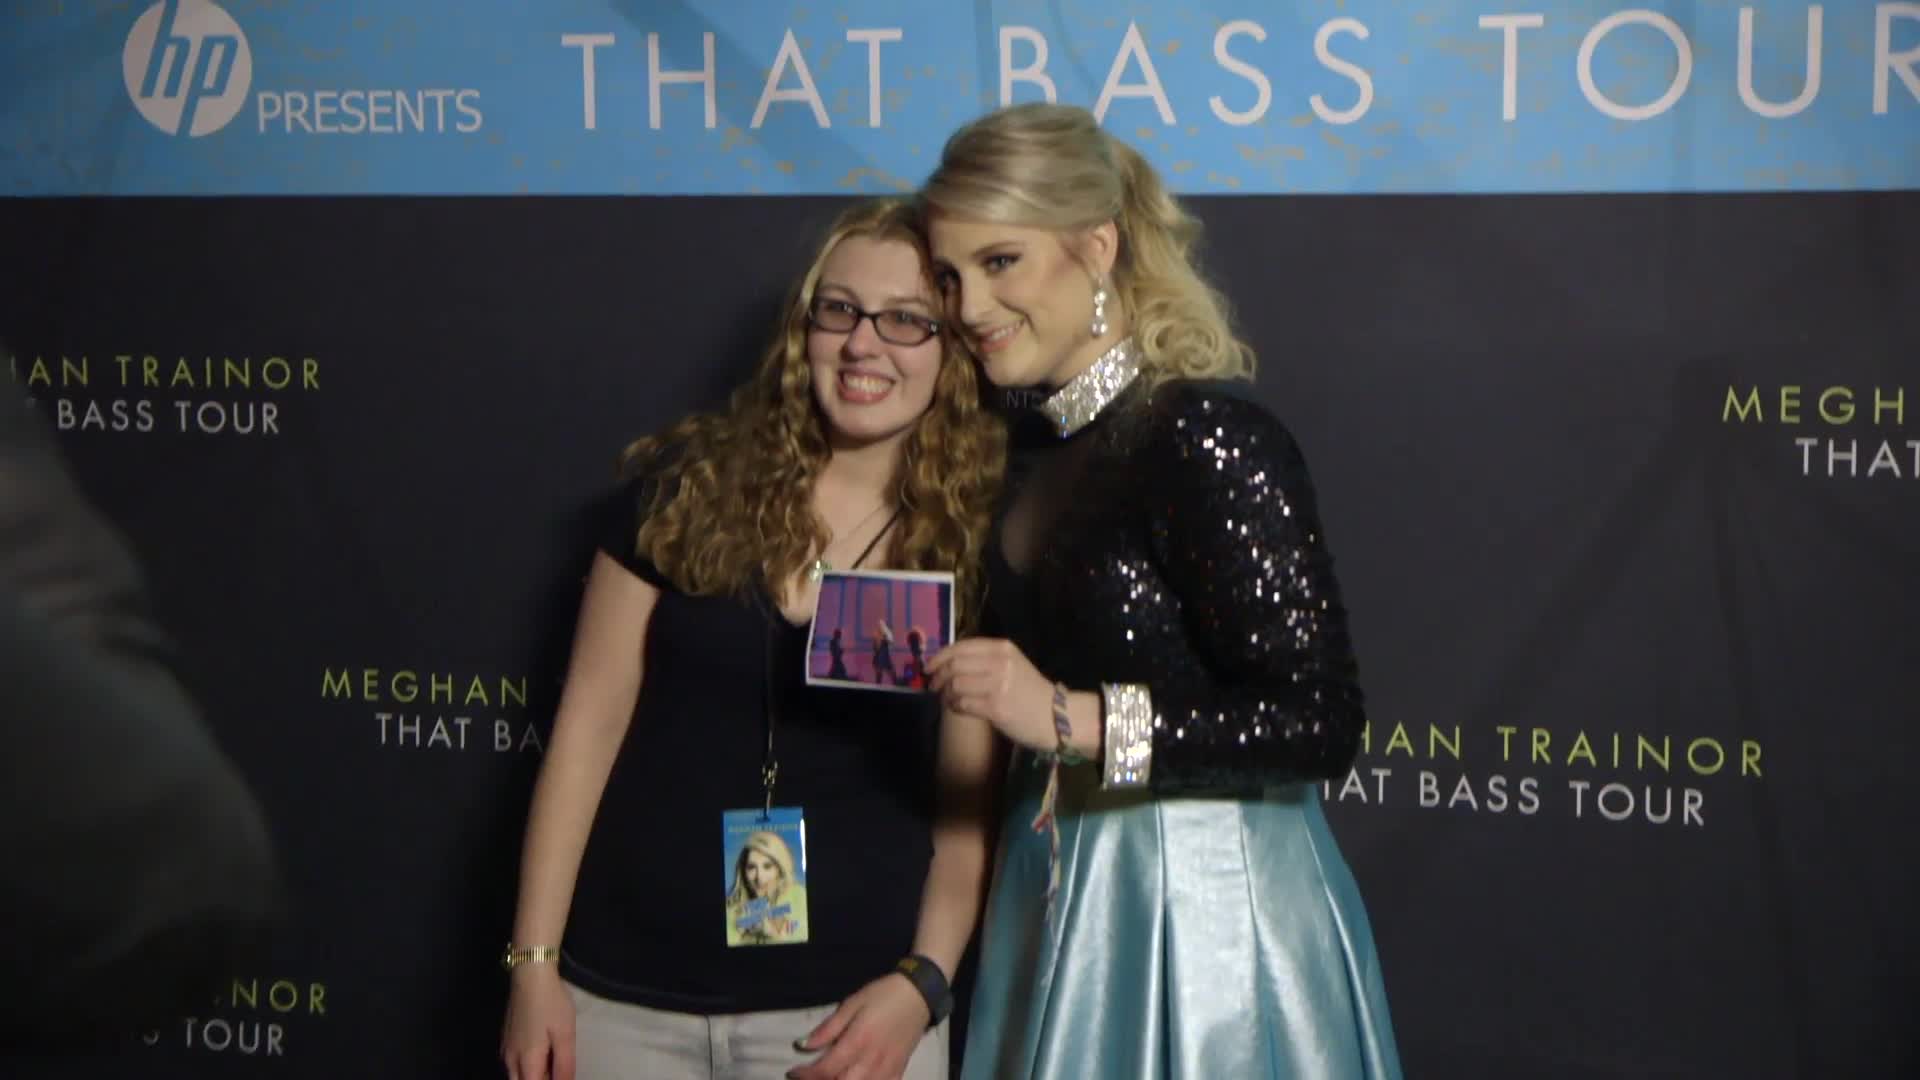 meghantrainor and a loyal fan teared up seeing each other again on